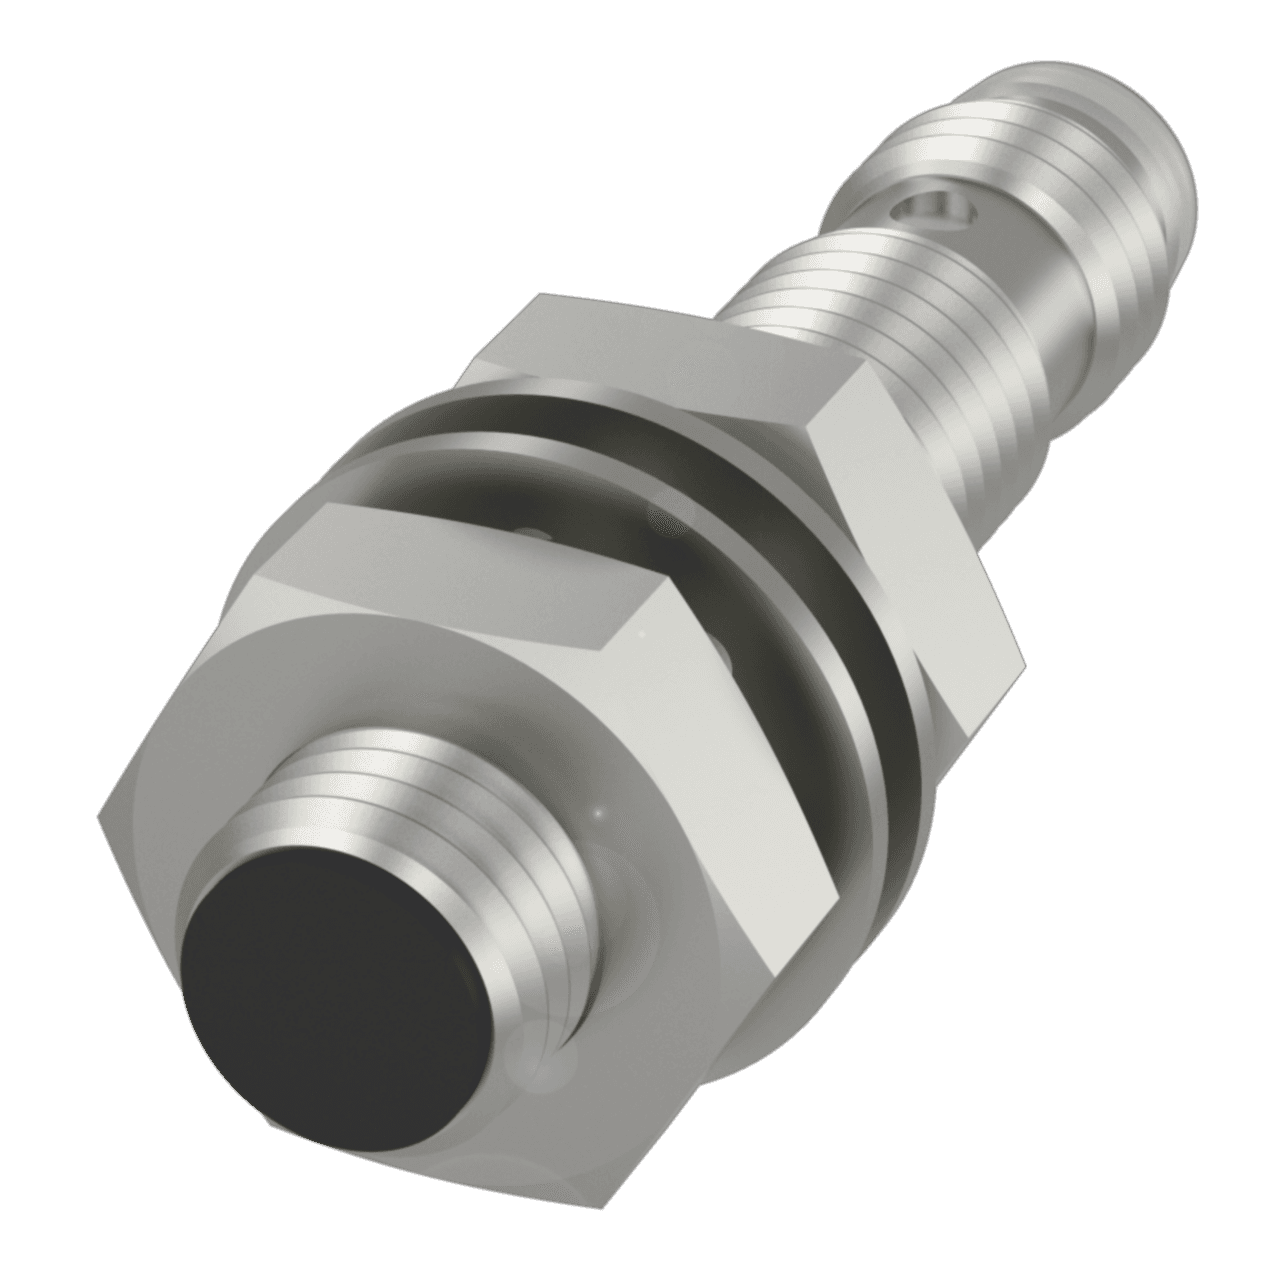 Balluff BES00CJ Inductive standard sensors with preferred type, Dimension: Ø 8 x 40 mm, Style: M8x1, Installation: for flush mounting, Range: 1.5 mm, Switching output: PNP Normally open (NO), Switching frequency: 1000 Hz, Housing material: Stainless steel